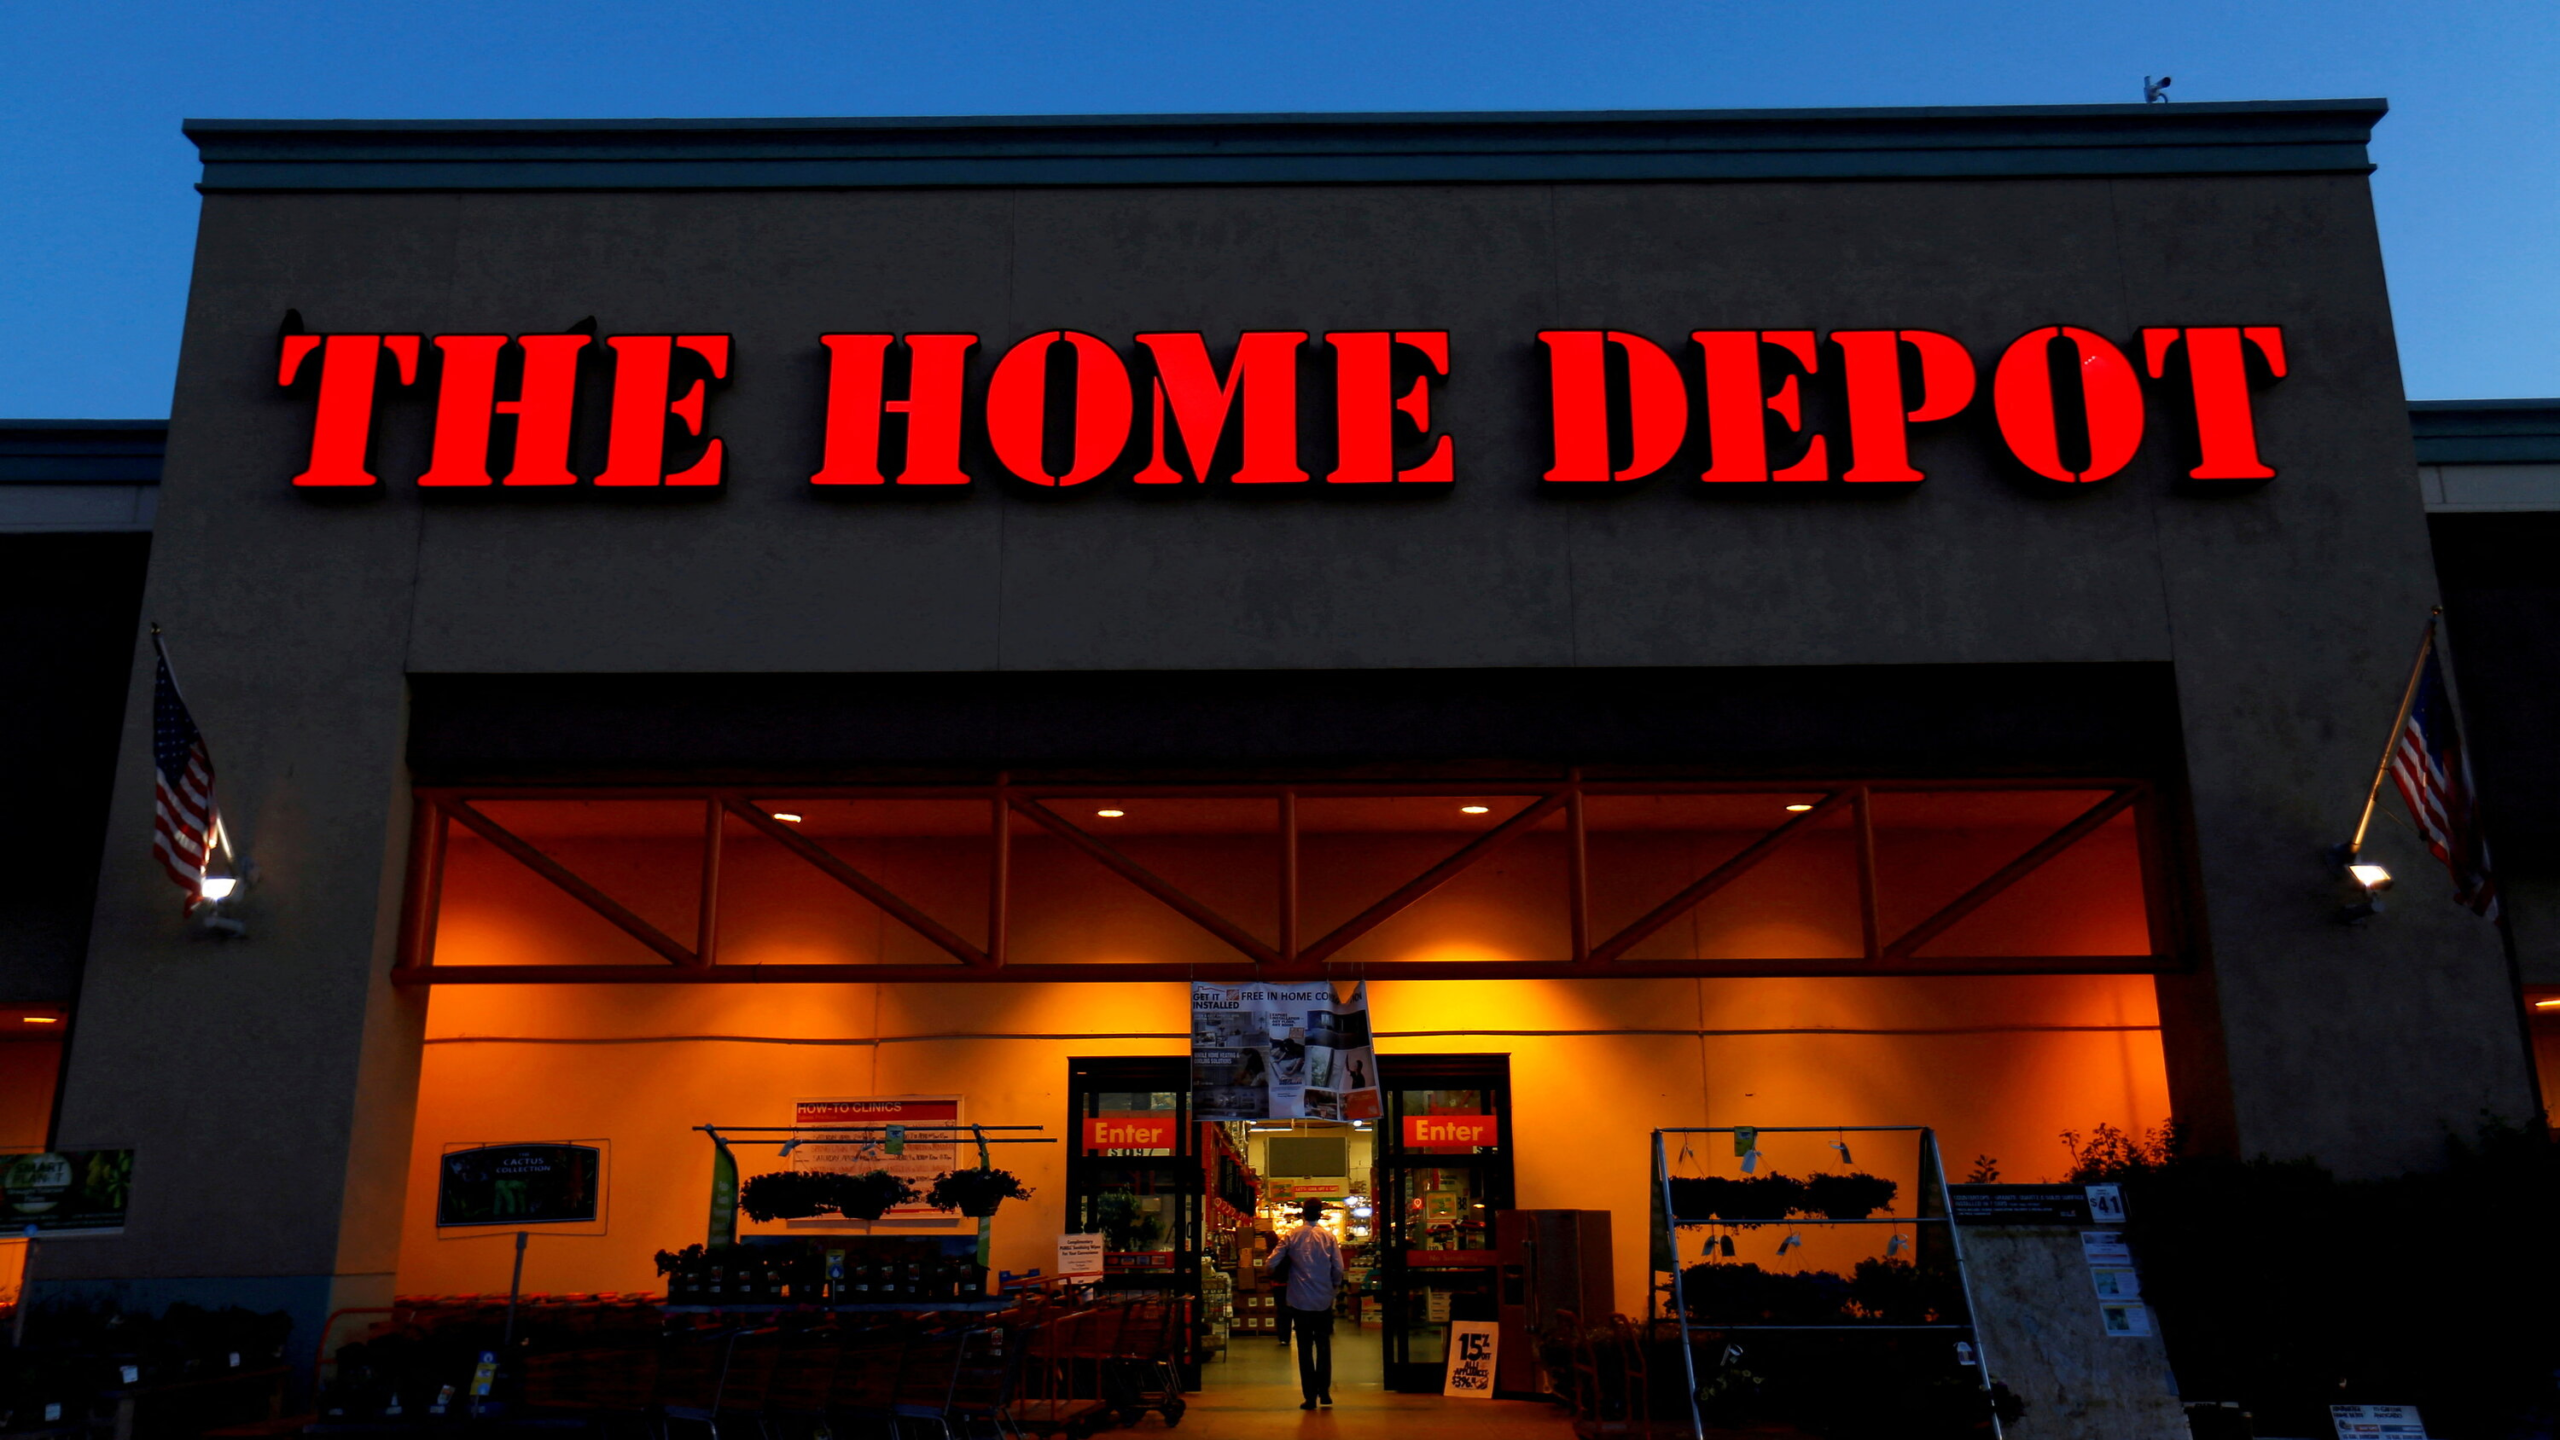 Why Do They Call It Home Depot